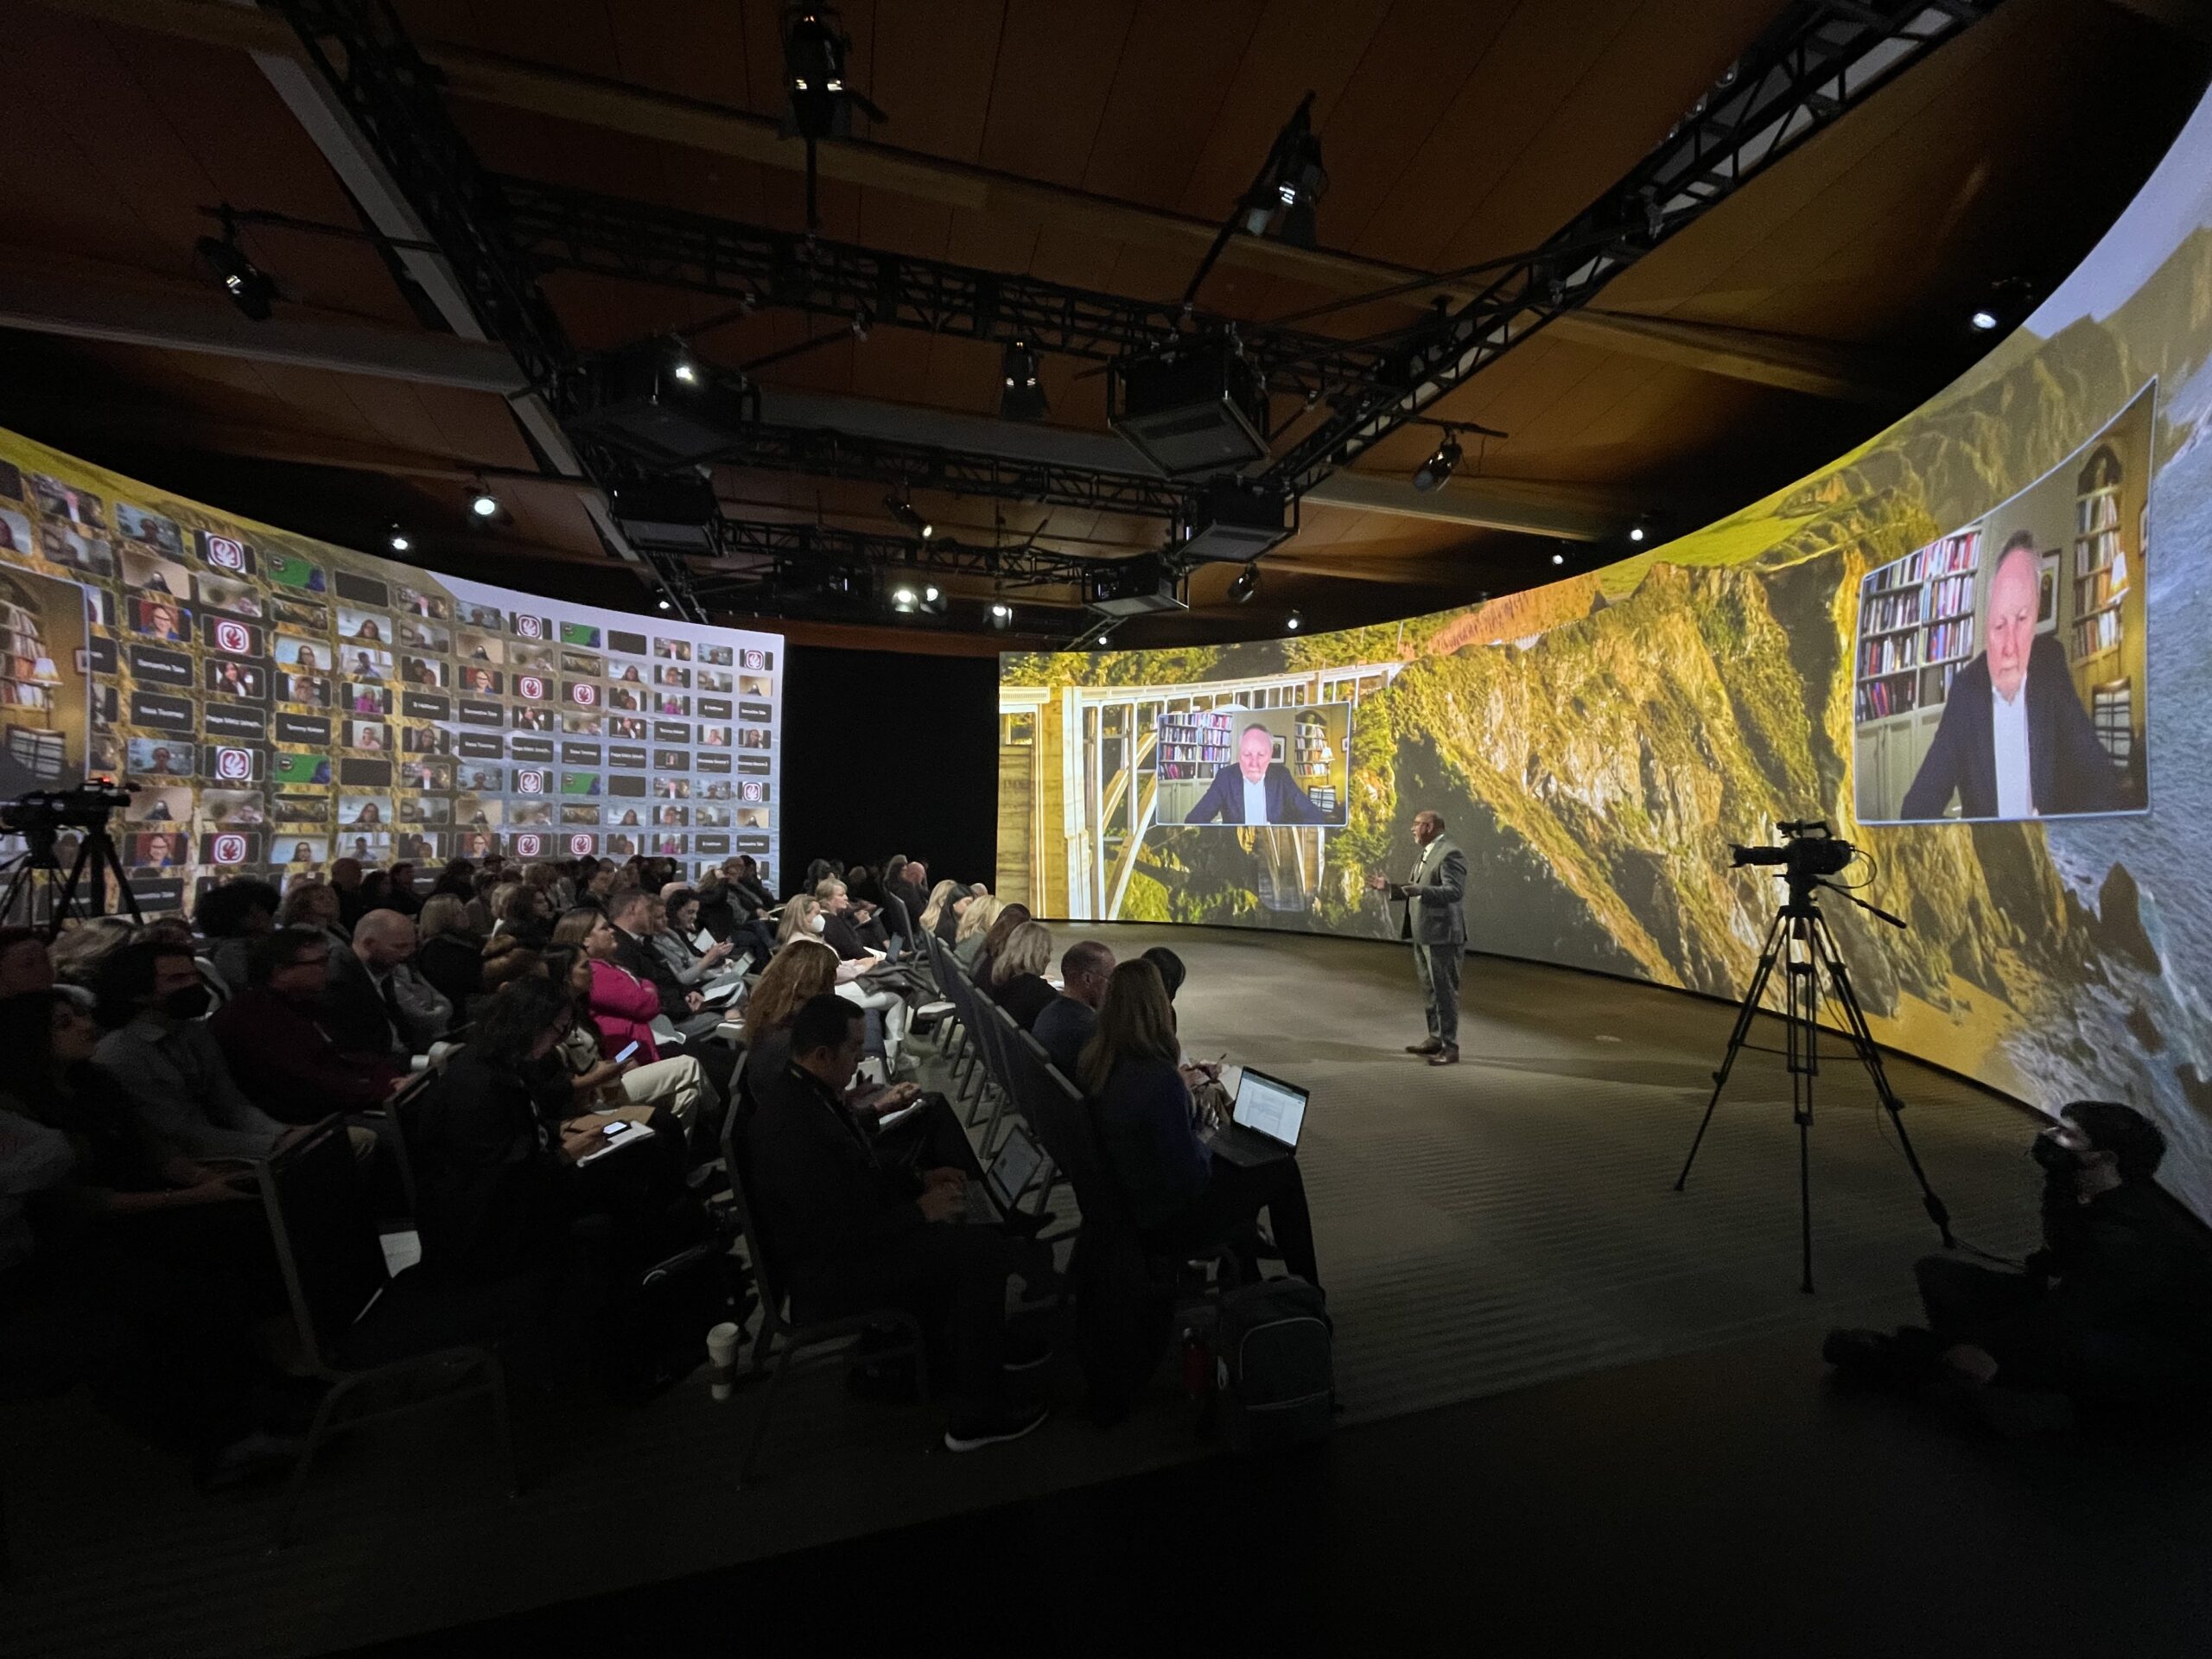 A speaker gives an address to a small crowd in the Immersive Design Studios' CANVAS Studio at Monterey Conference Center in California. Projector screens wrap around the round room.